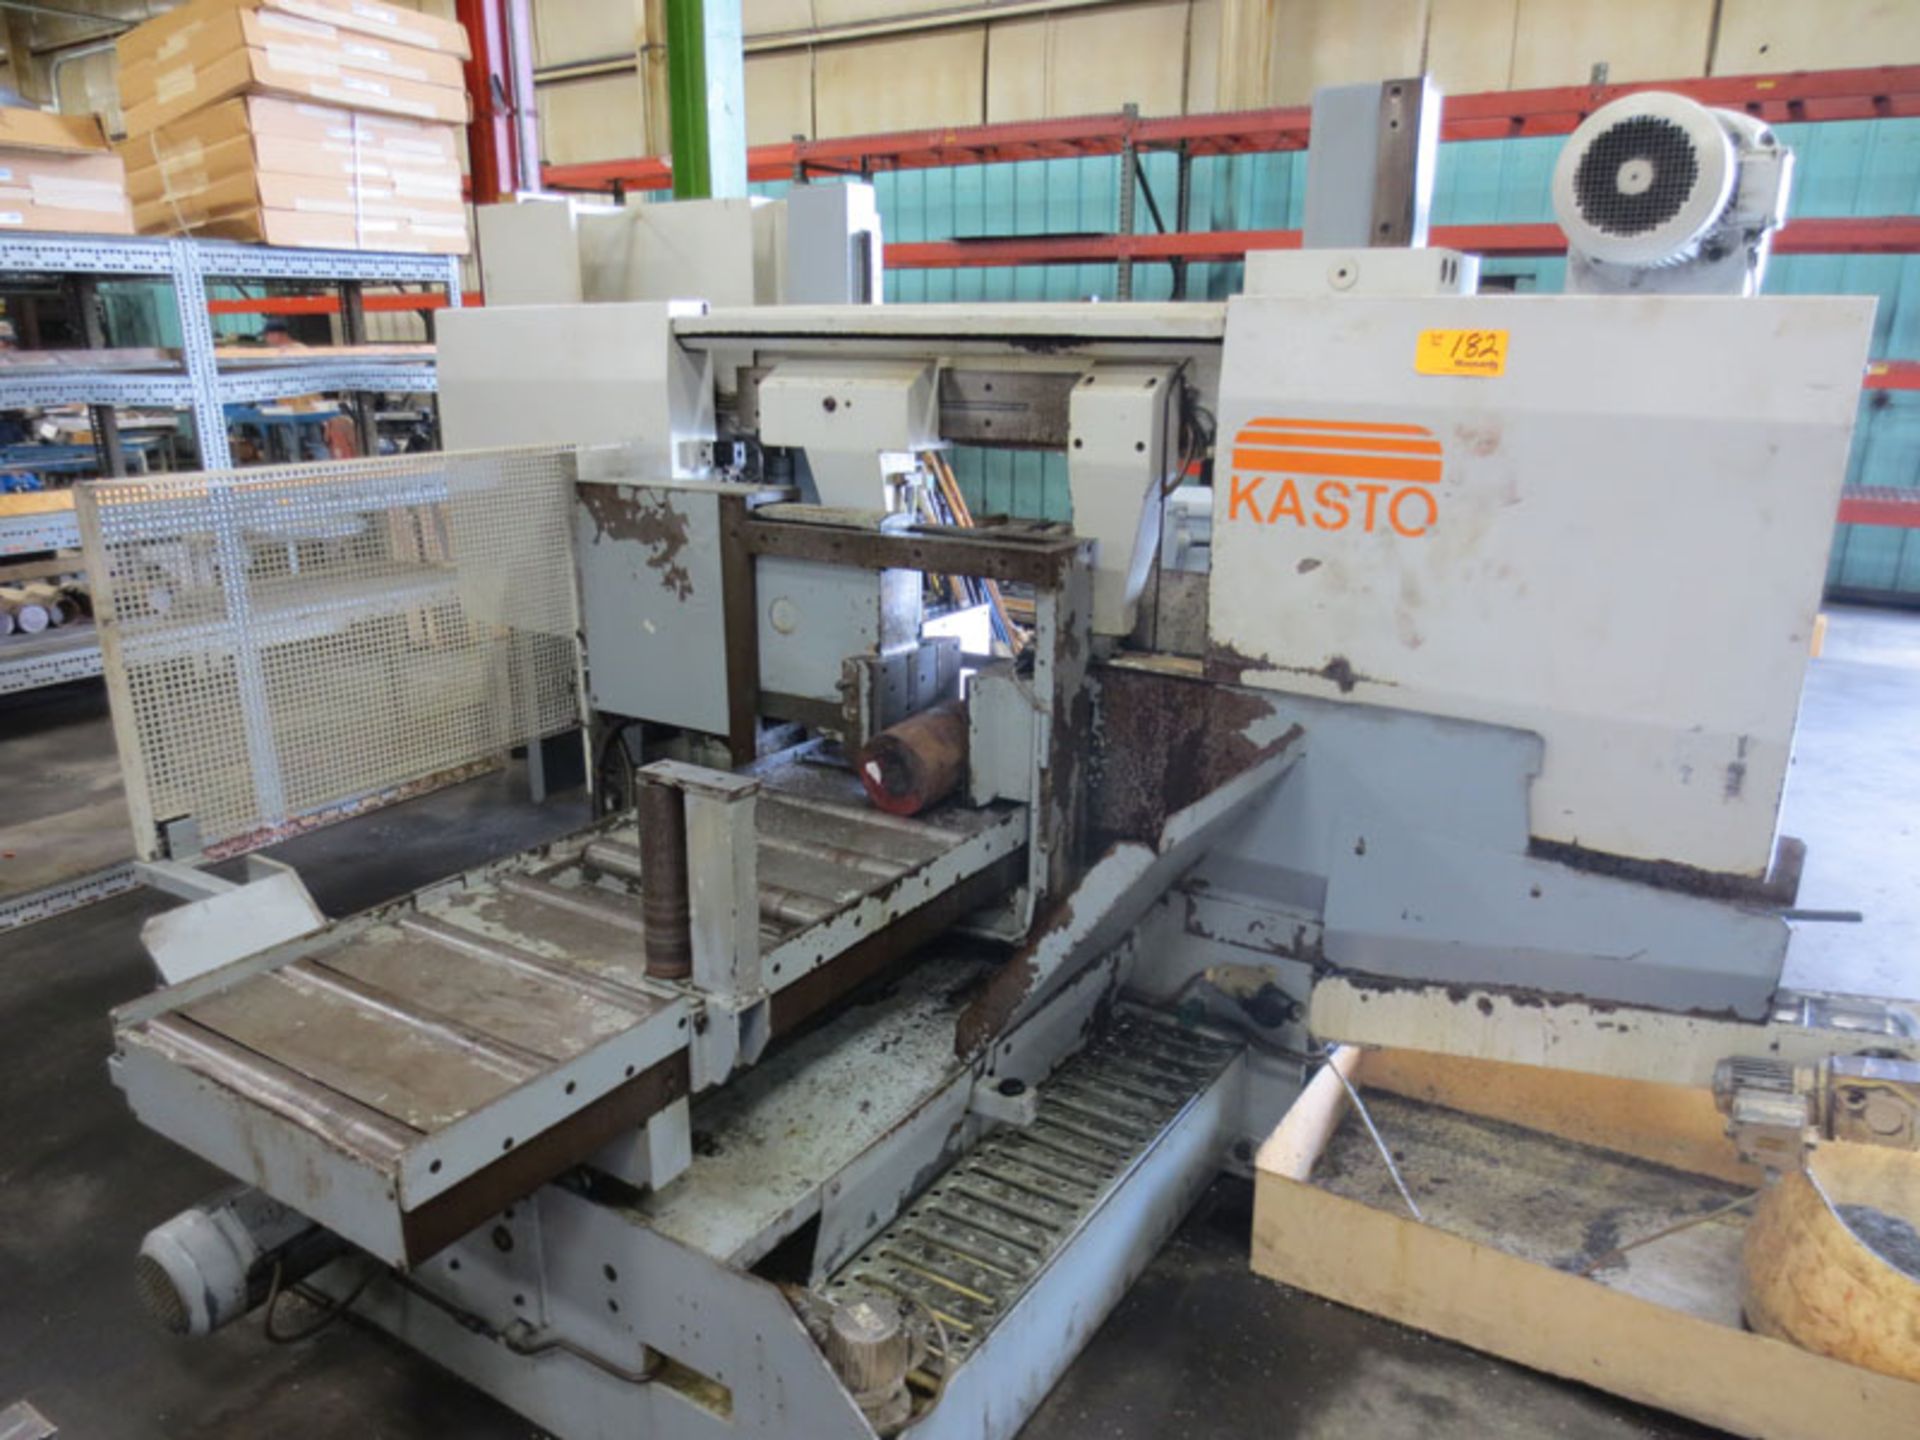 Kasto HBA 420AU Automatic Horizontal Bandsaw with approx. 22.5x62” raised roller outfeed and